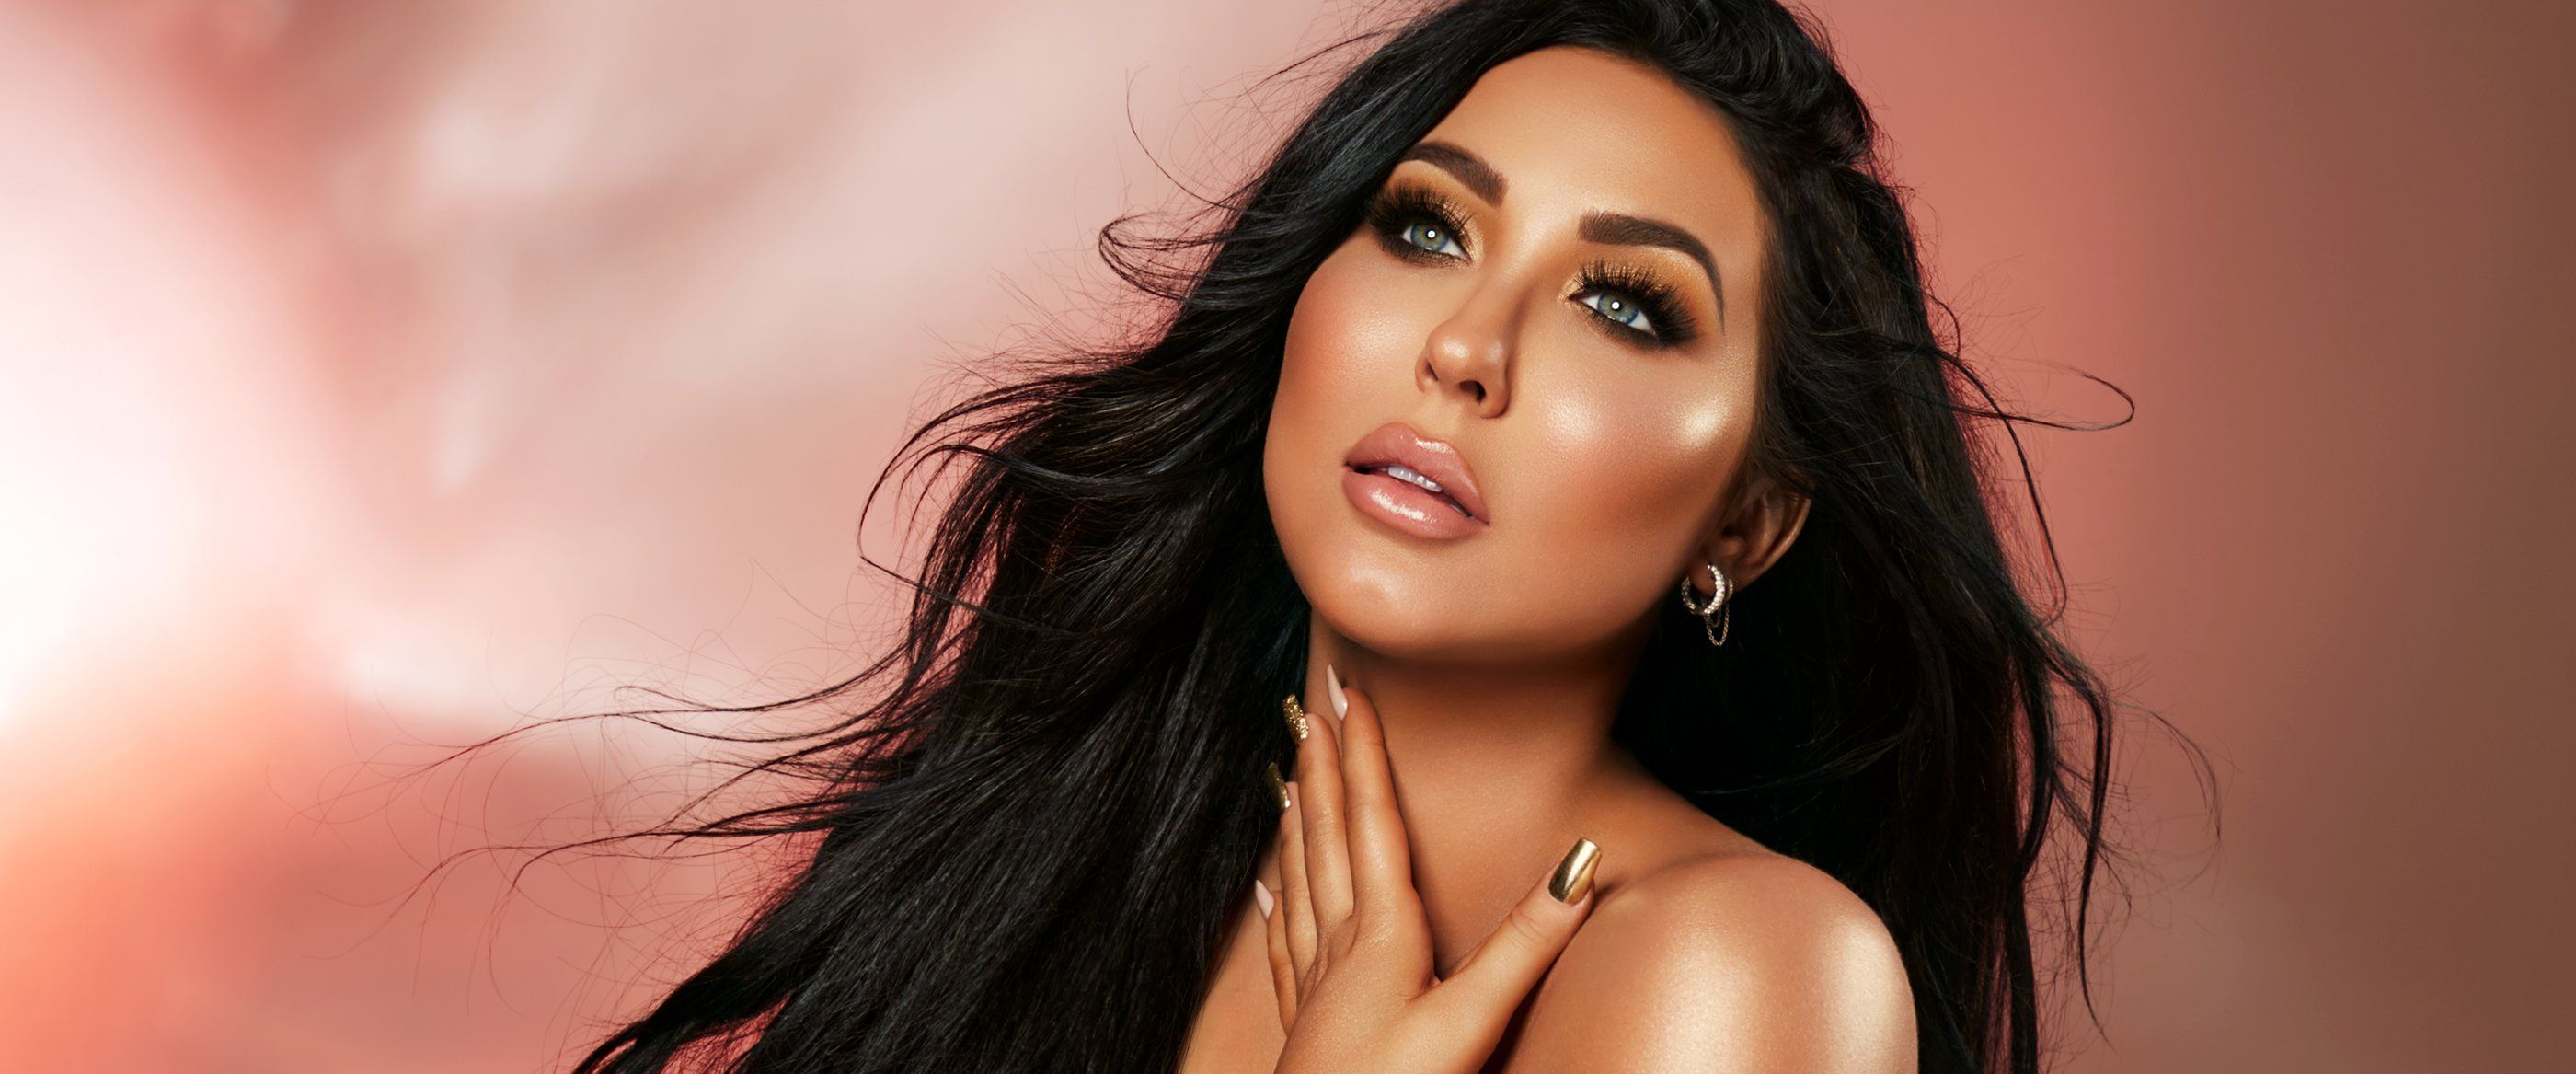 Beauty Influencer Jaclyn Hill's Makeup Controversies